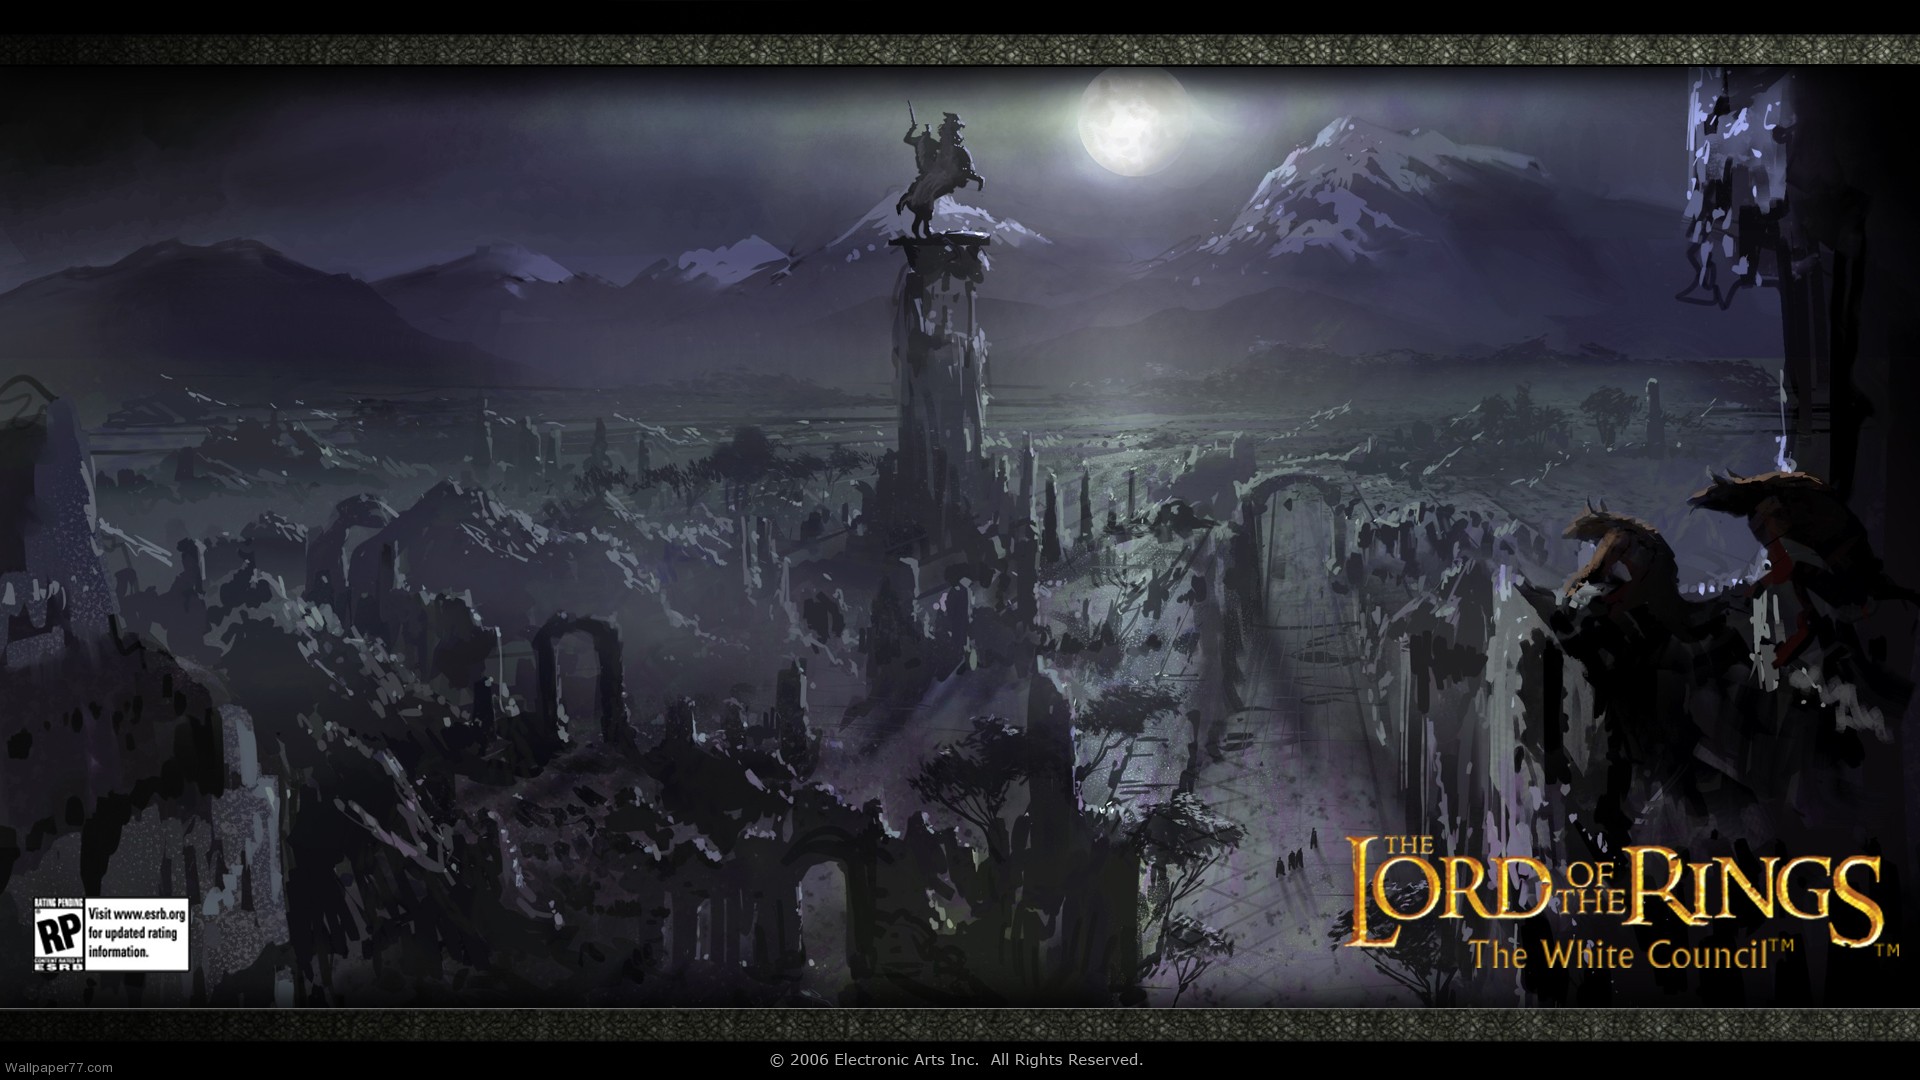 Lord of the Rings Wallpaper 4 lord of the rings wallpaperslord of the